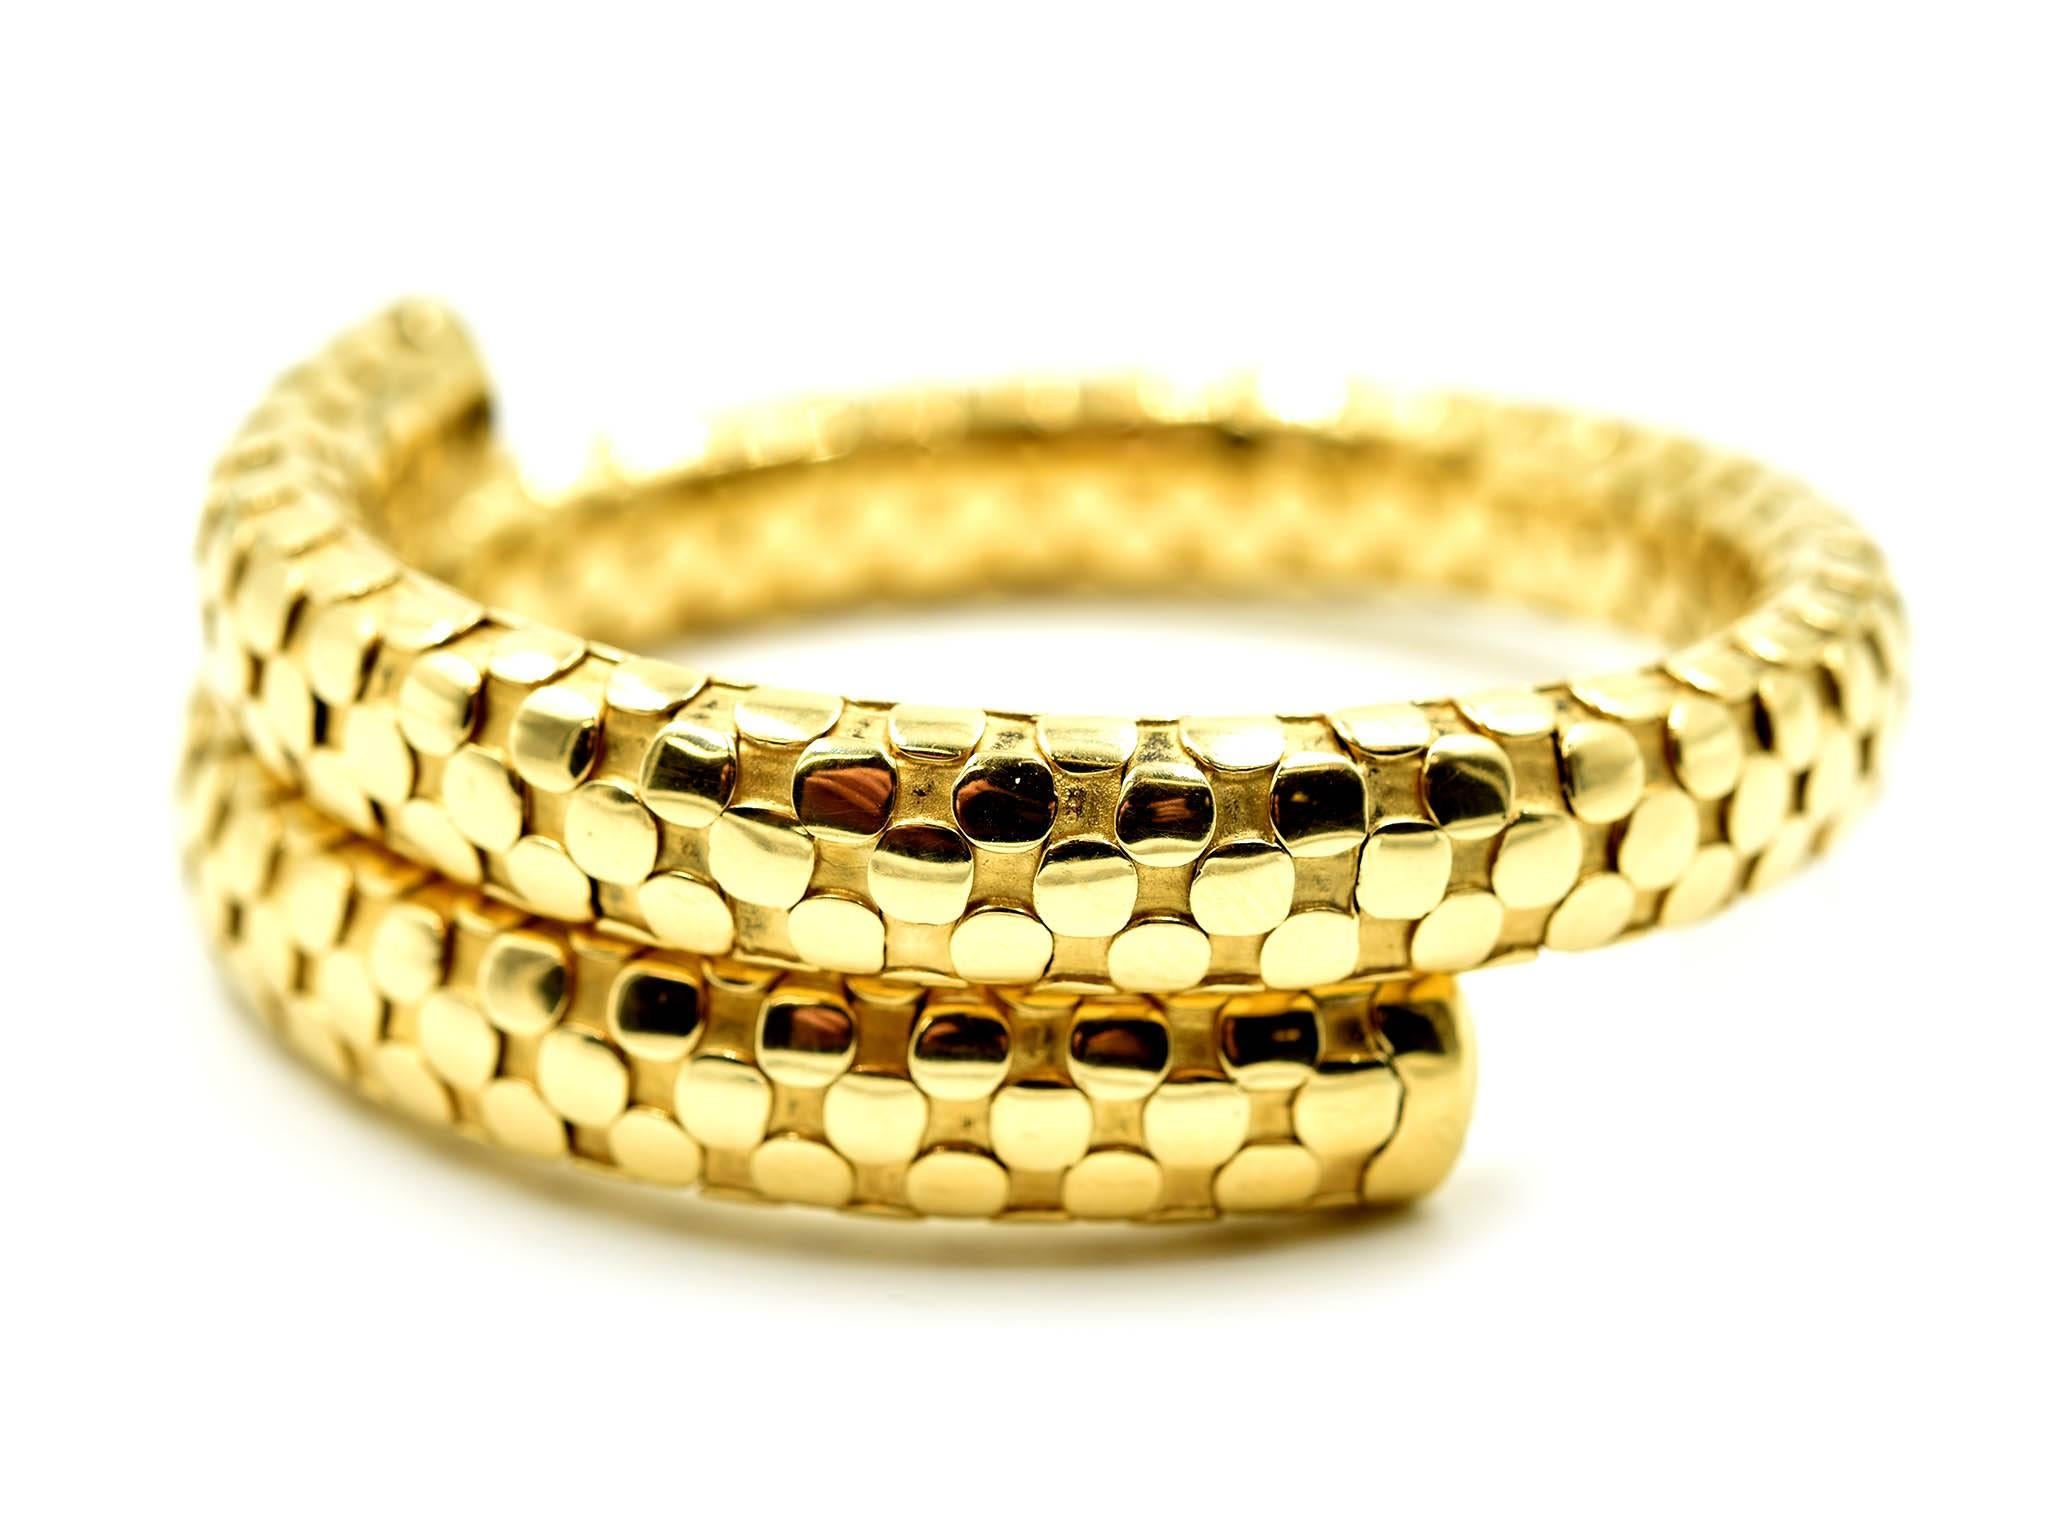 Designer: John Hardy
Collection: Dot Collection
Material: 18k yellow gold
Dimensions: bracelet opens up to 7 inches and is 3/8 an inch wide, top of the bangle where is ¾ an inch wide
Weight: 60.34 grams
